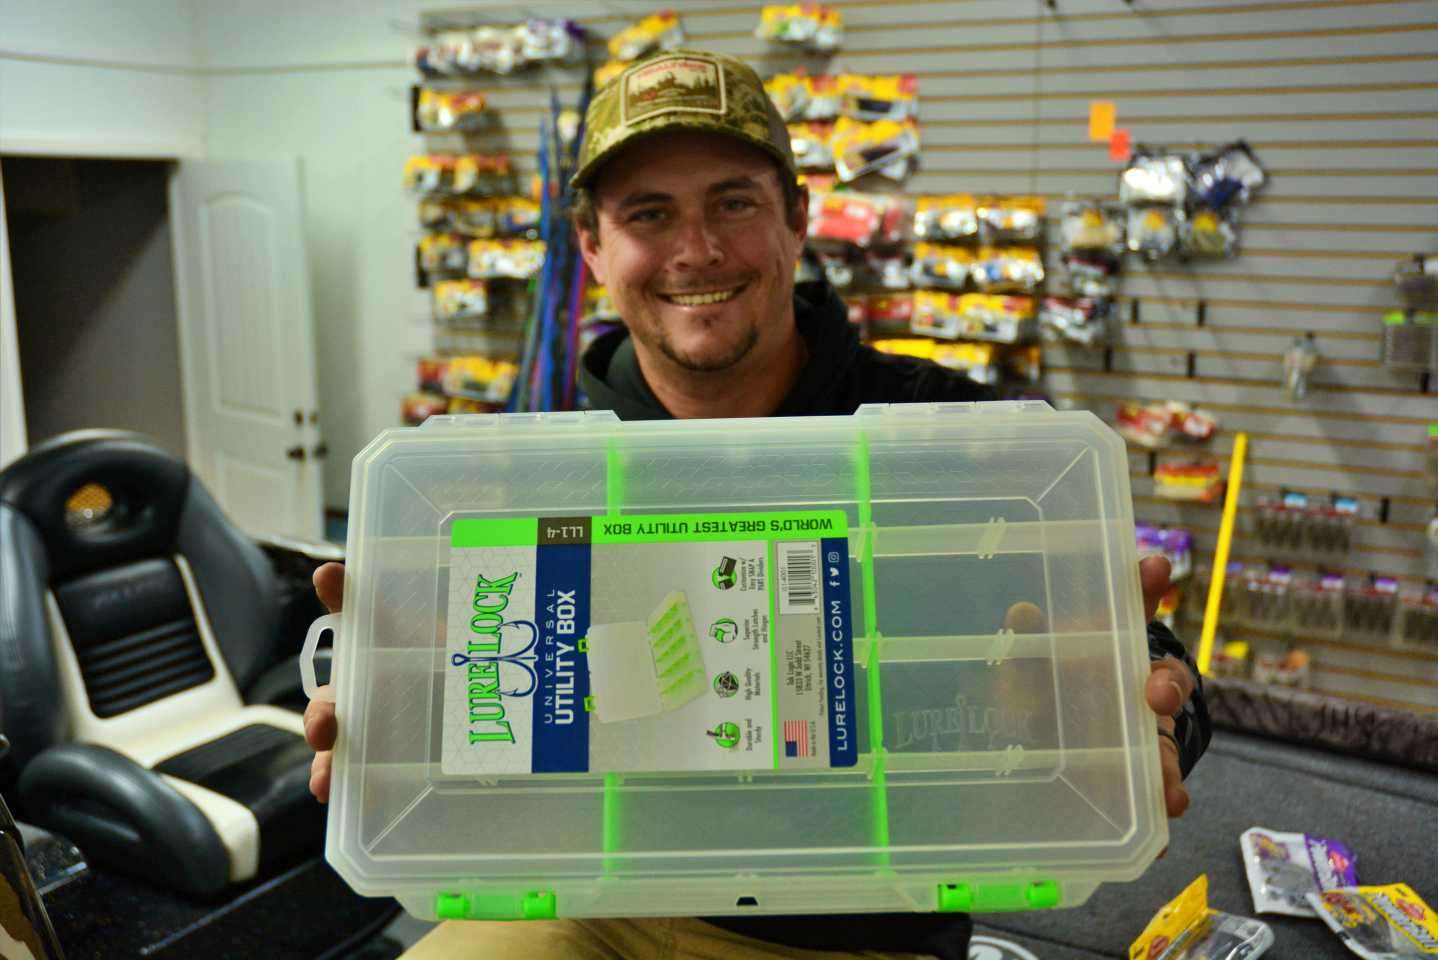 Bassmaster Elite Series pro Justin Atkins is about to fill this Lure Lock utility box with his choices of baits for a beginnerâs tacklebox. 